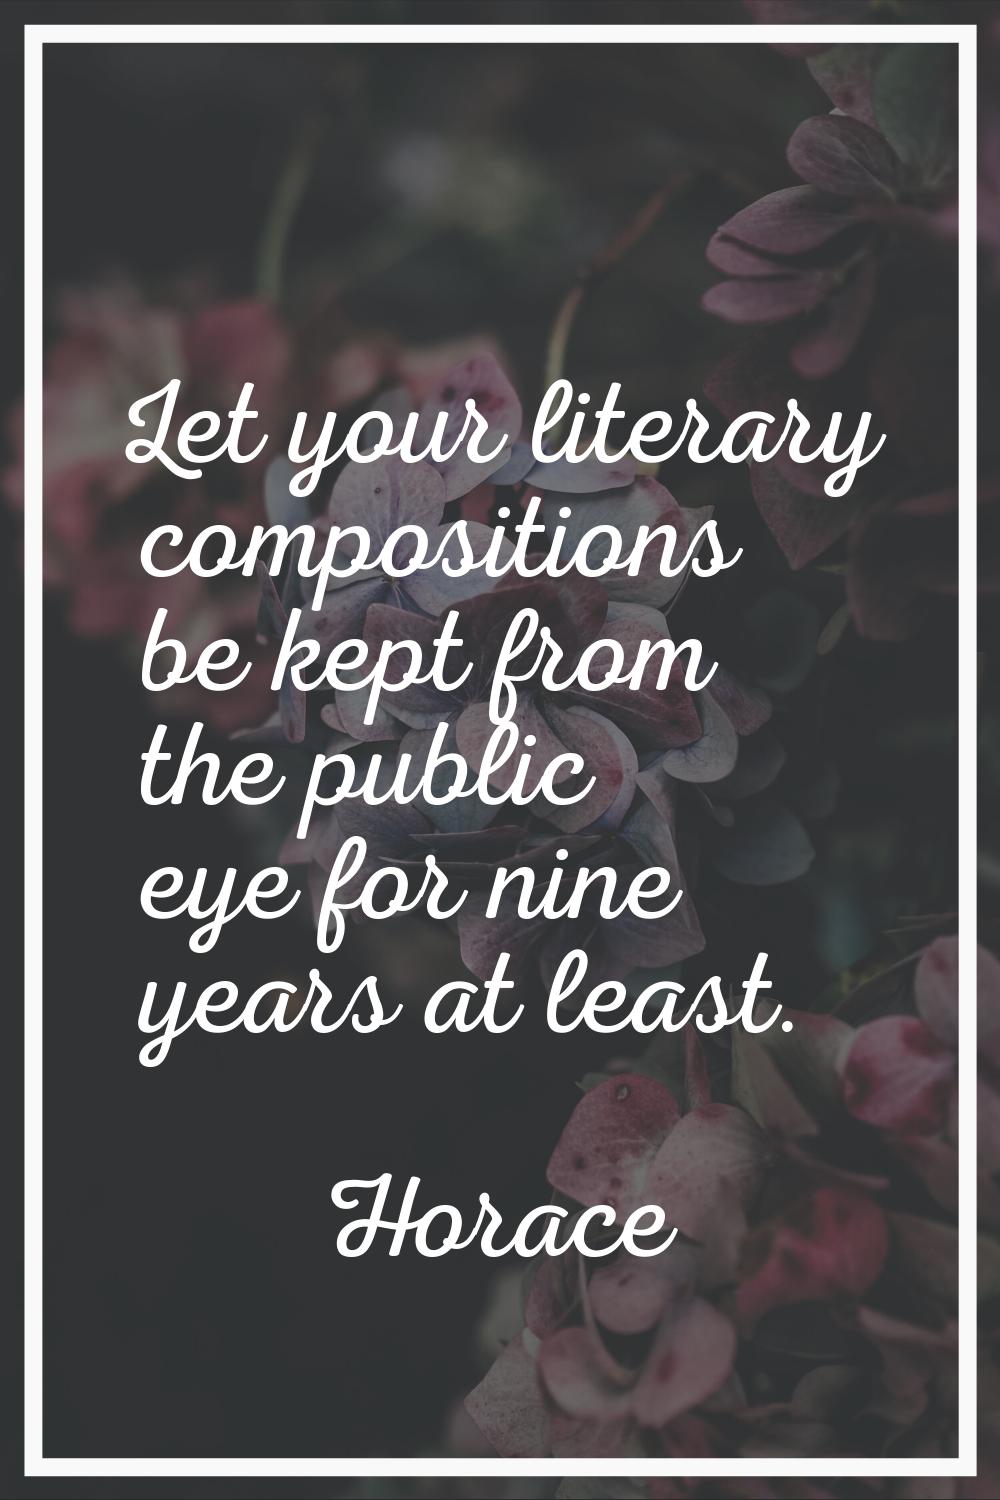 Let your literary compositions be kept from the public eye for nine years at least.